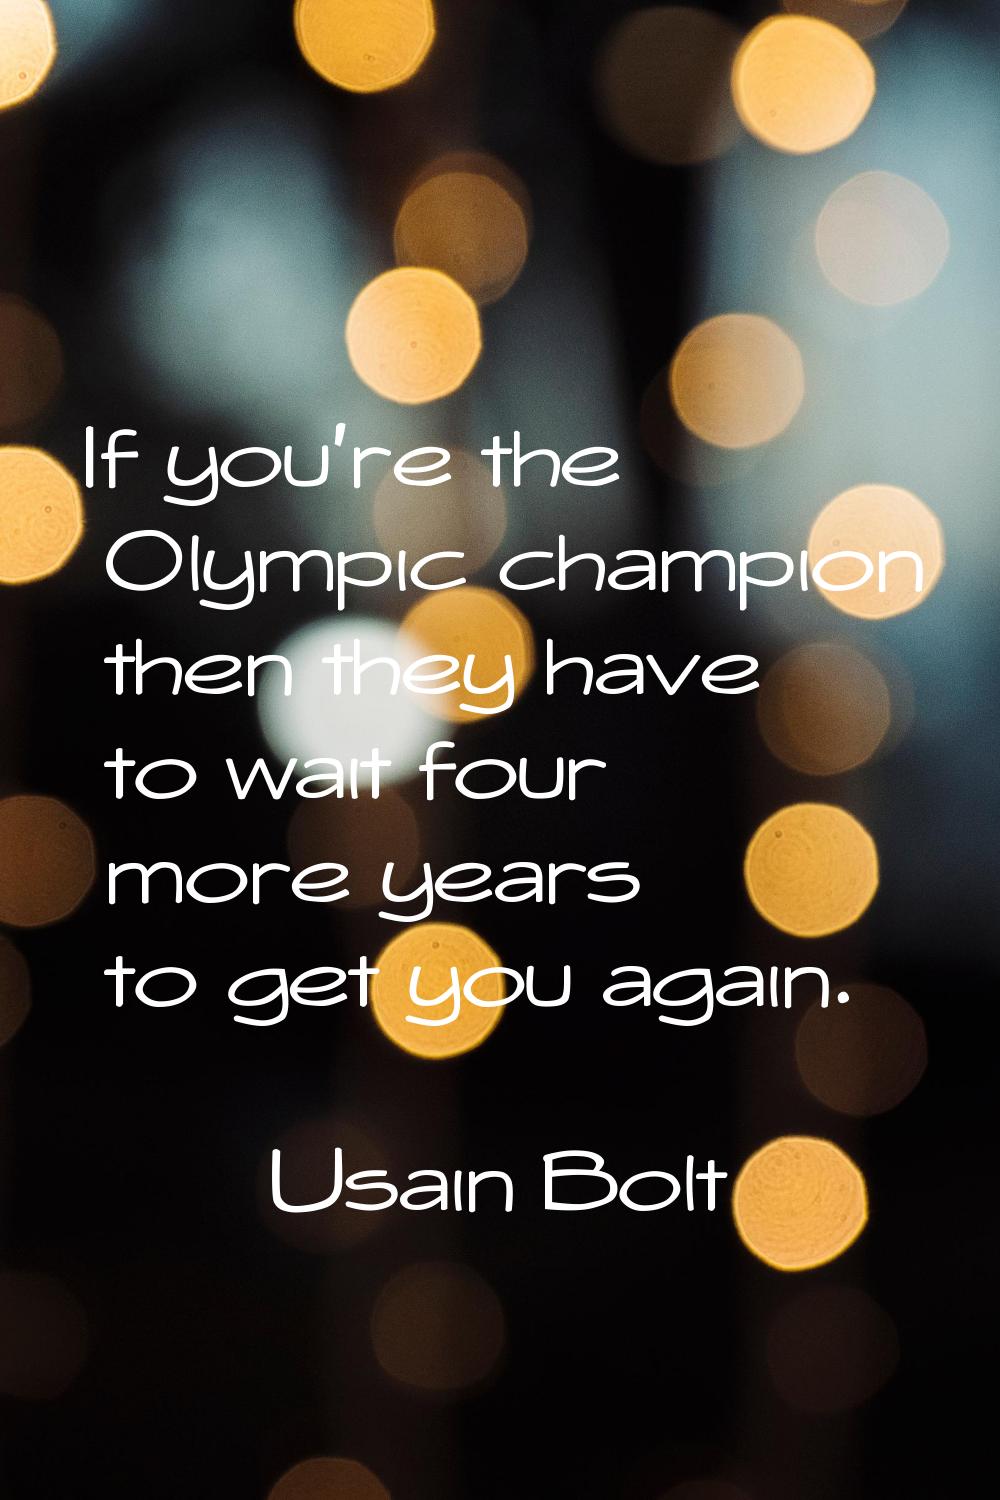 If you're the Olympic champion then they have to wait four more years to get you again.